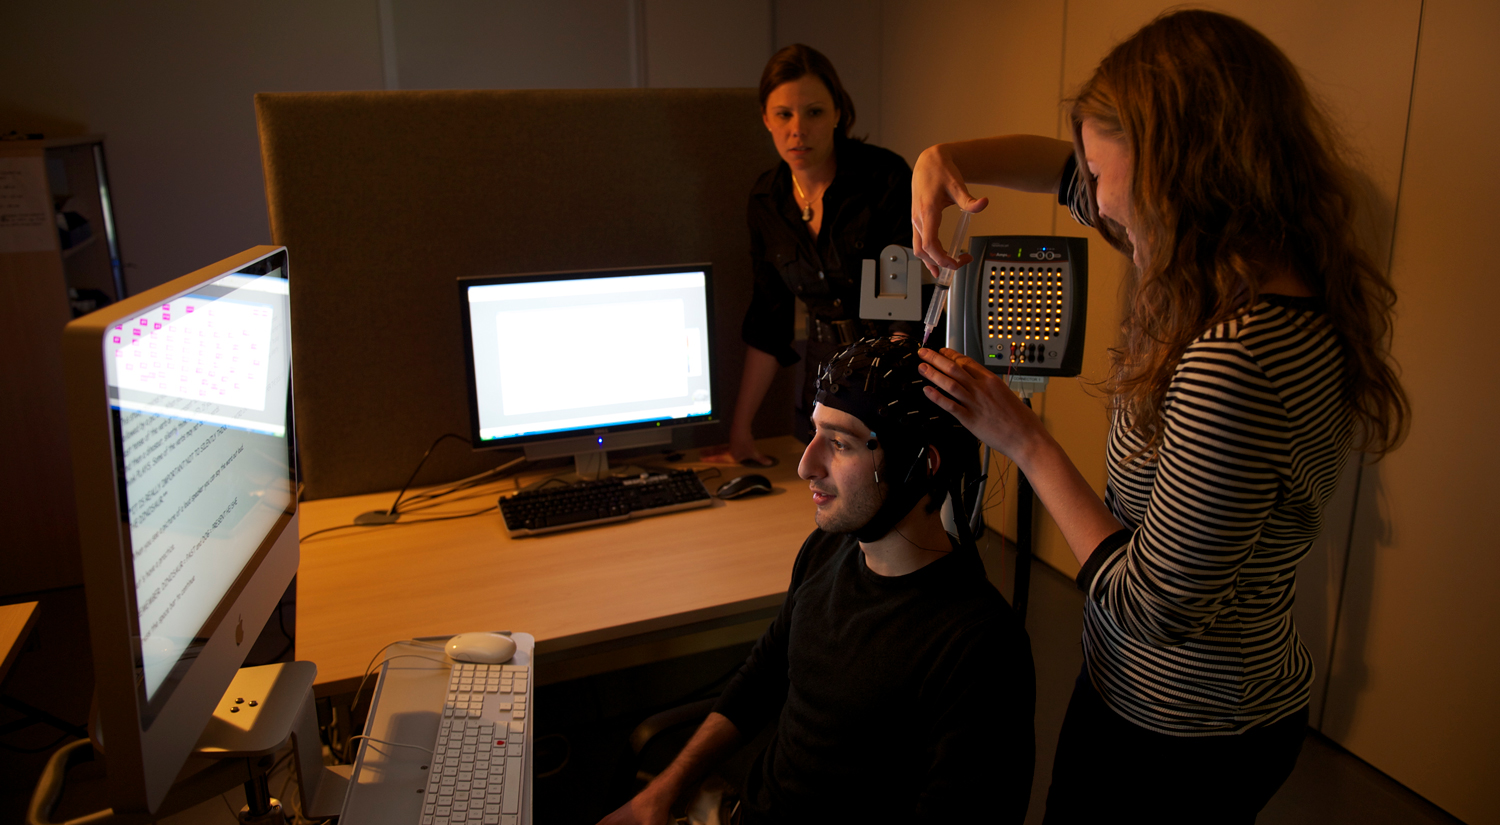 A student wearing an EEG cap is sitting in front of a large computer monitor. A second student is standing next to them, injecting some gel in to one of the cap sensors. Professor Silke Paulmann from the Department of Psychology is standing in the background, next to a second computer, watching them.